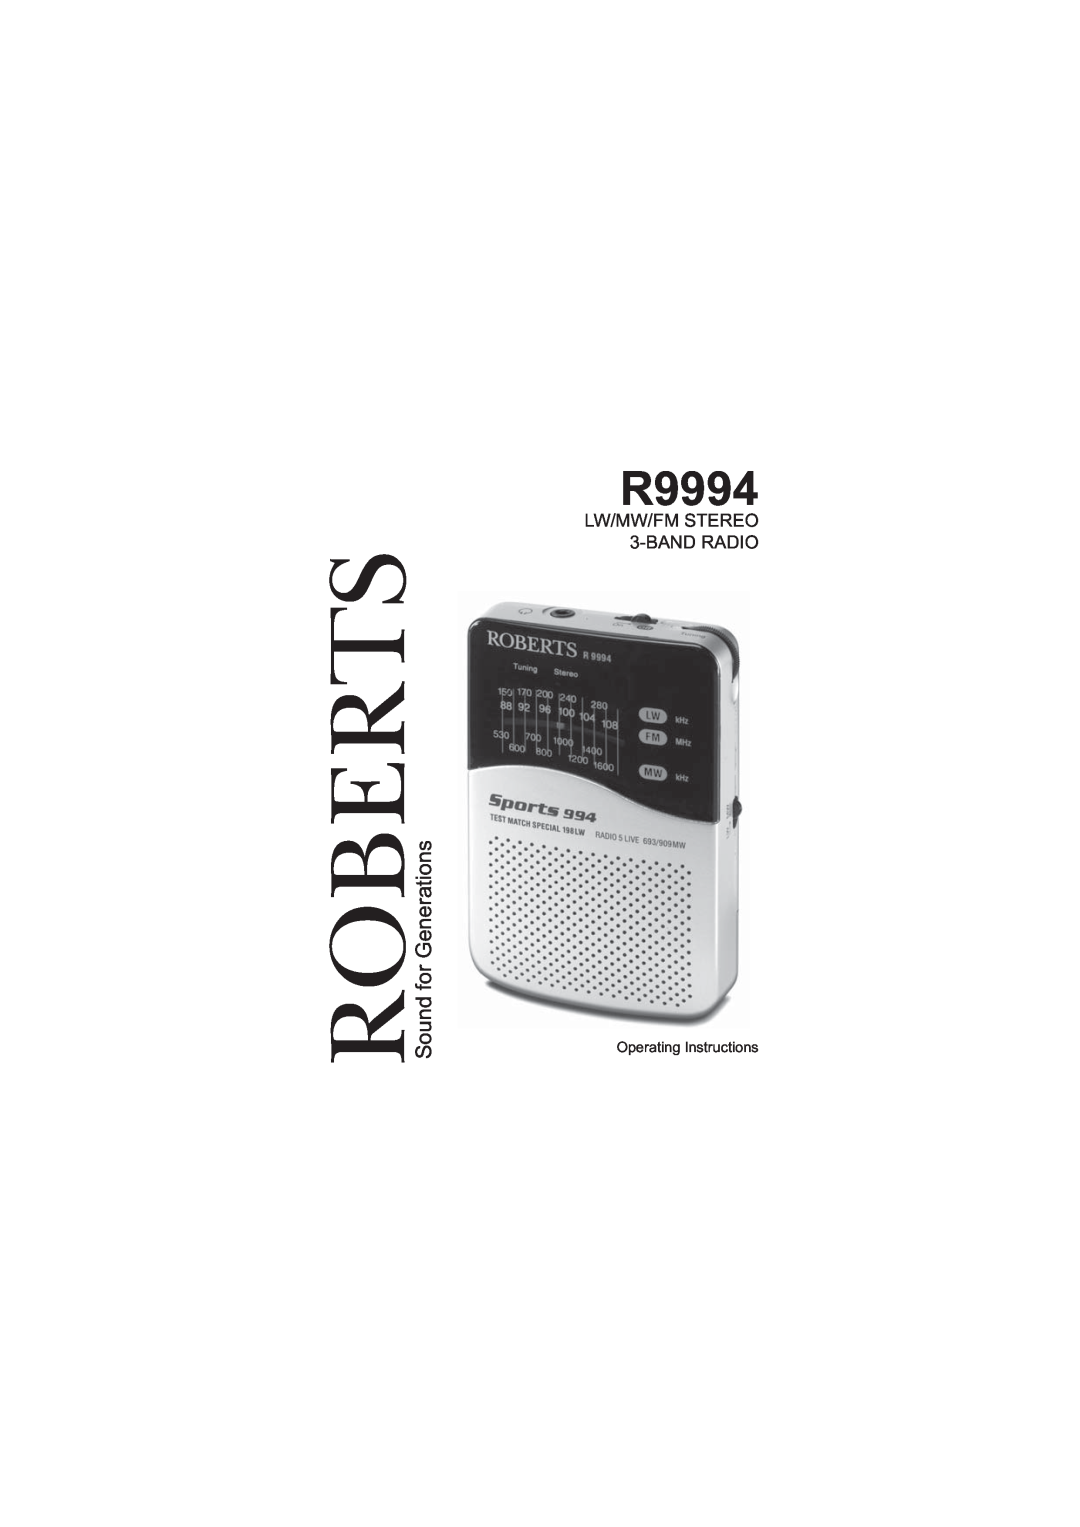 Roberts Radio R9994 operating instructions Sound for Generations, LW/MW/FM STEREO 3-BANDRADIO, Roberts 